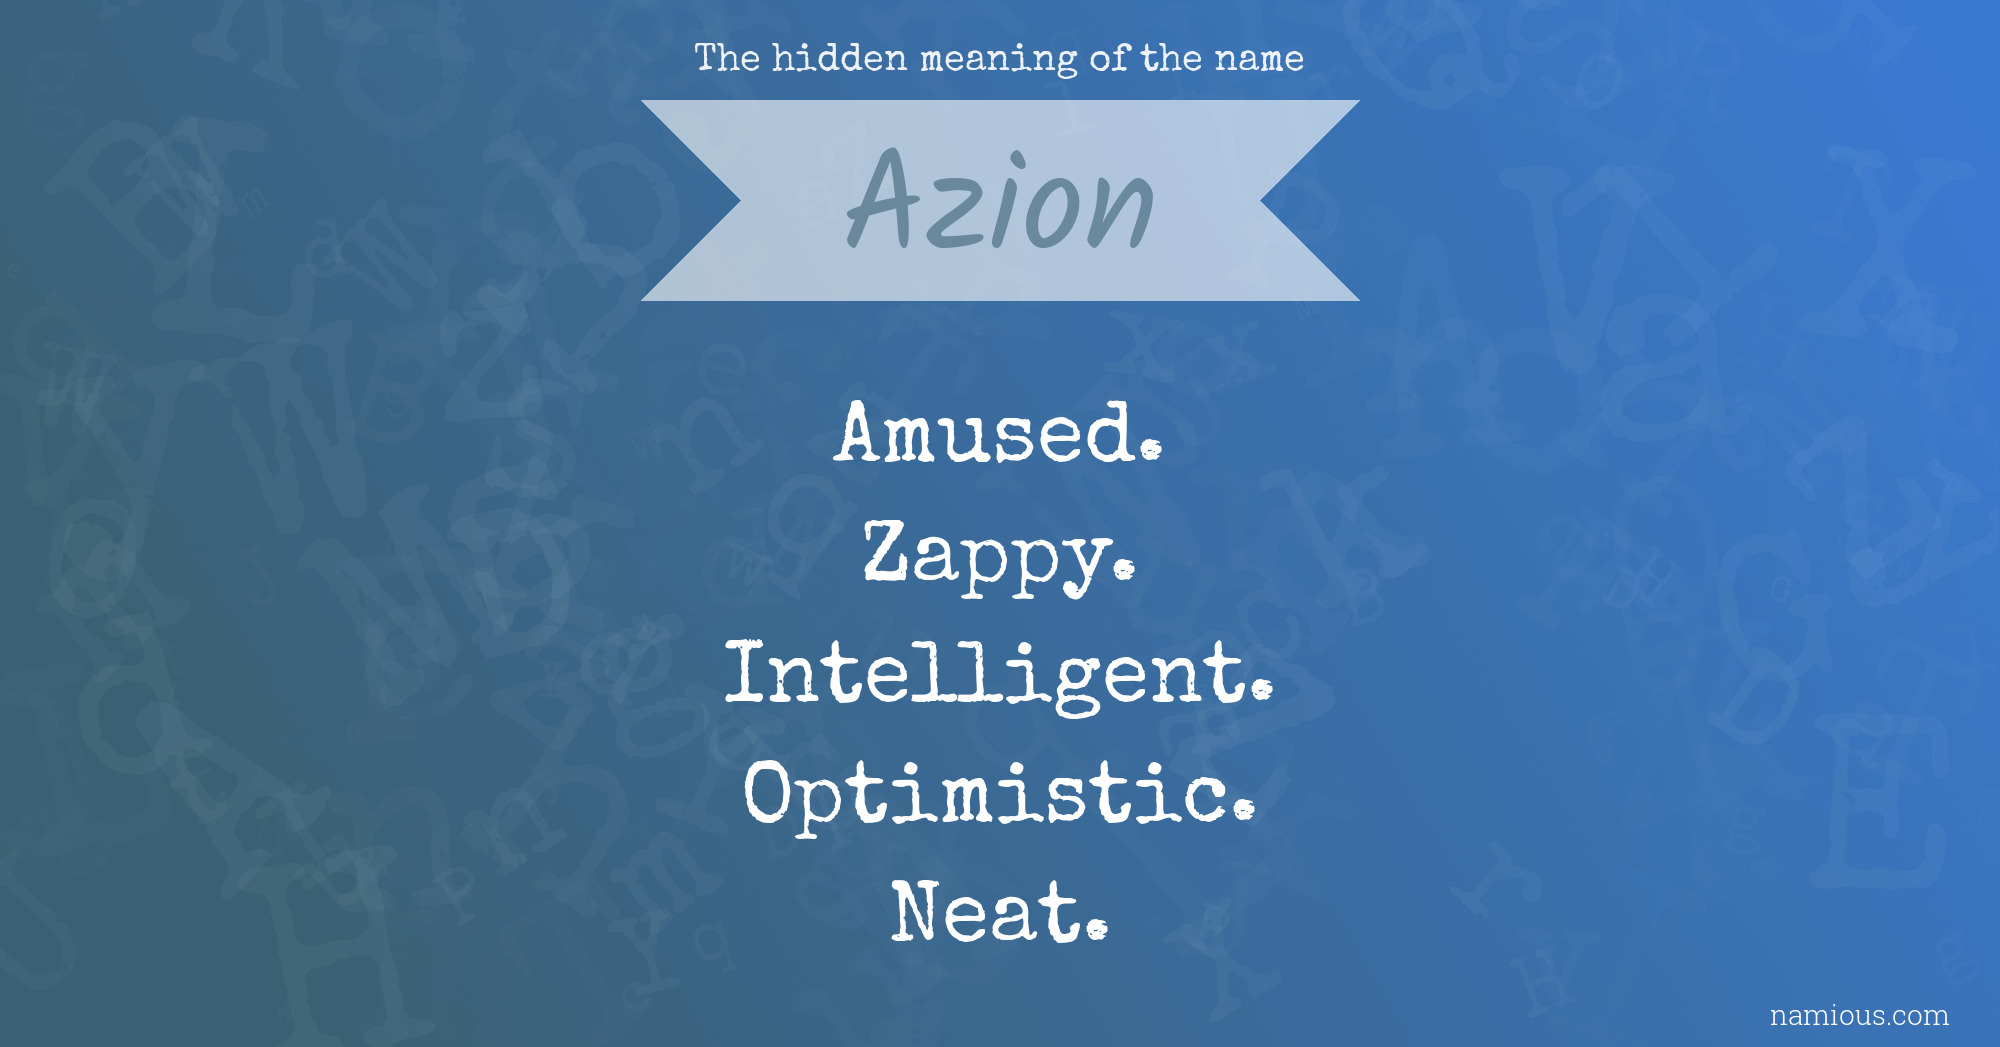 The hidden meaning of the name Azion